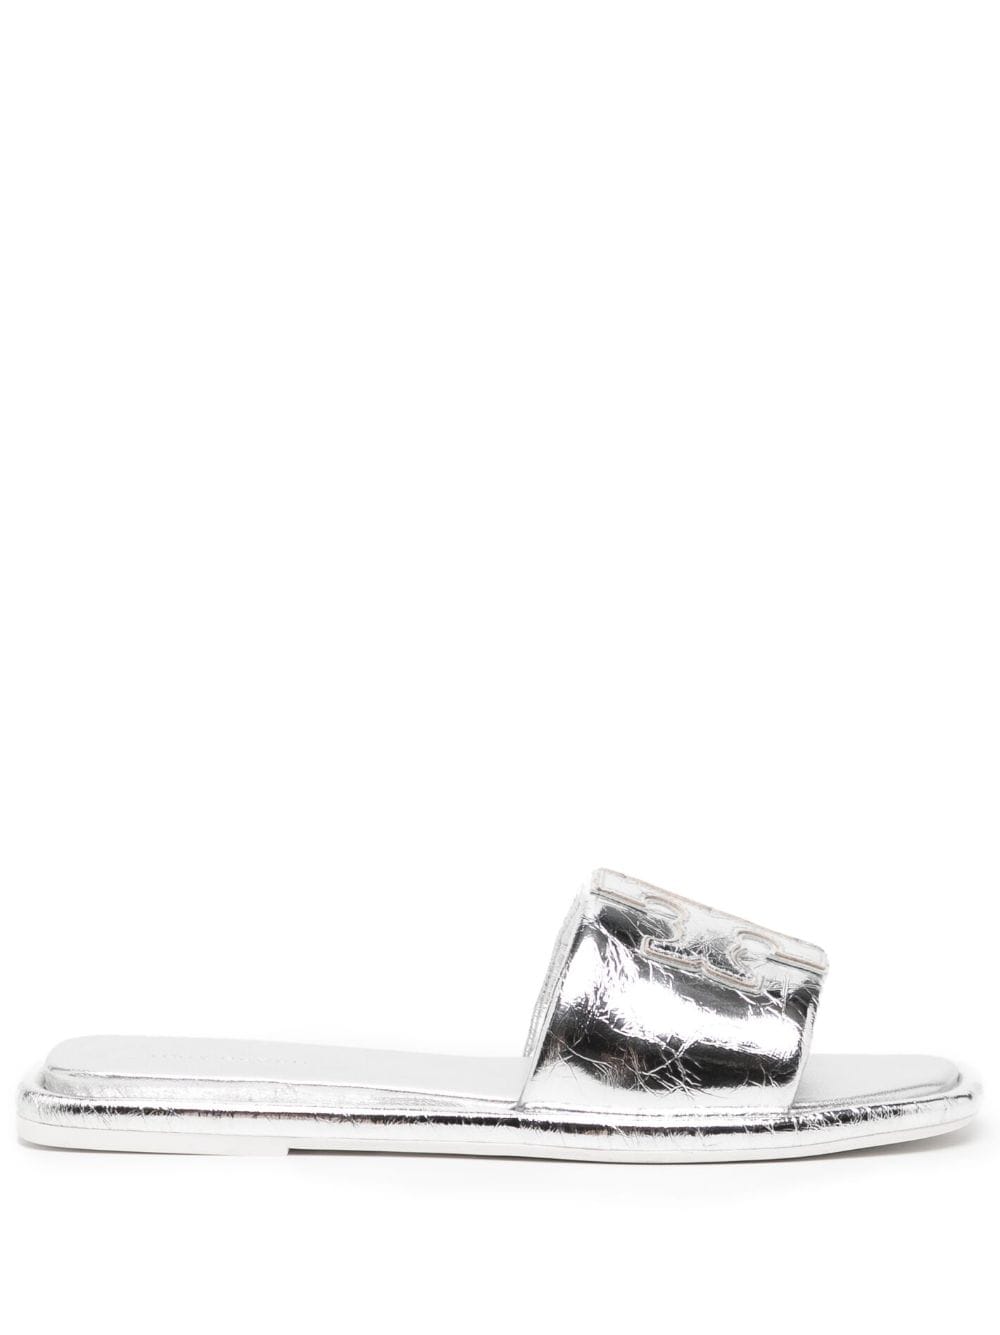 Tory Burch Double T leather slides - Silver von Tory Burch